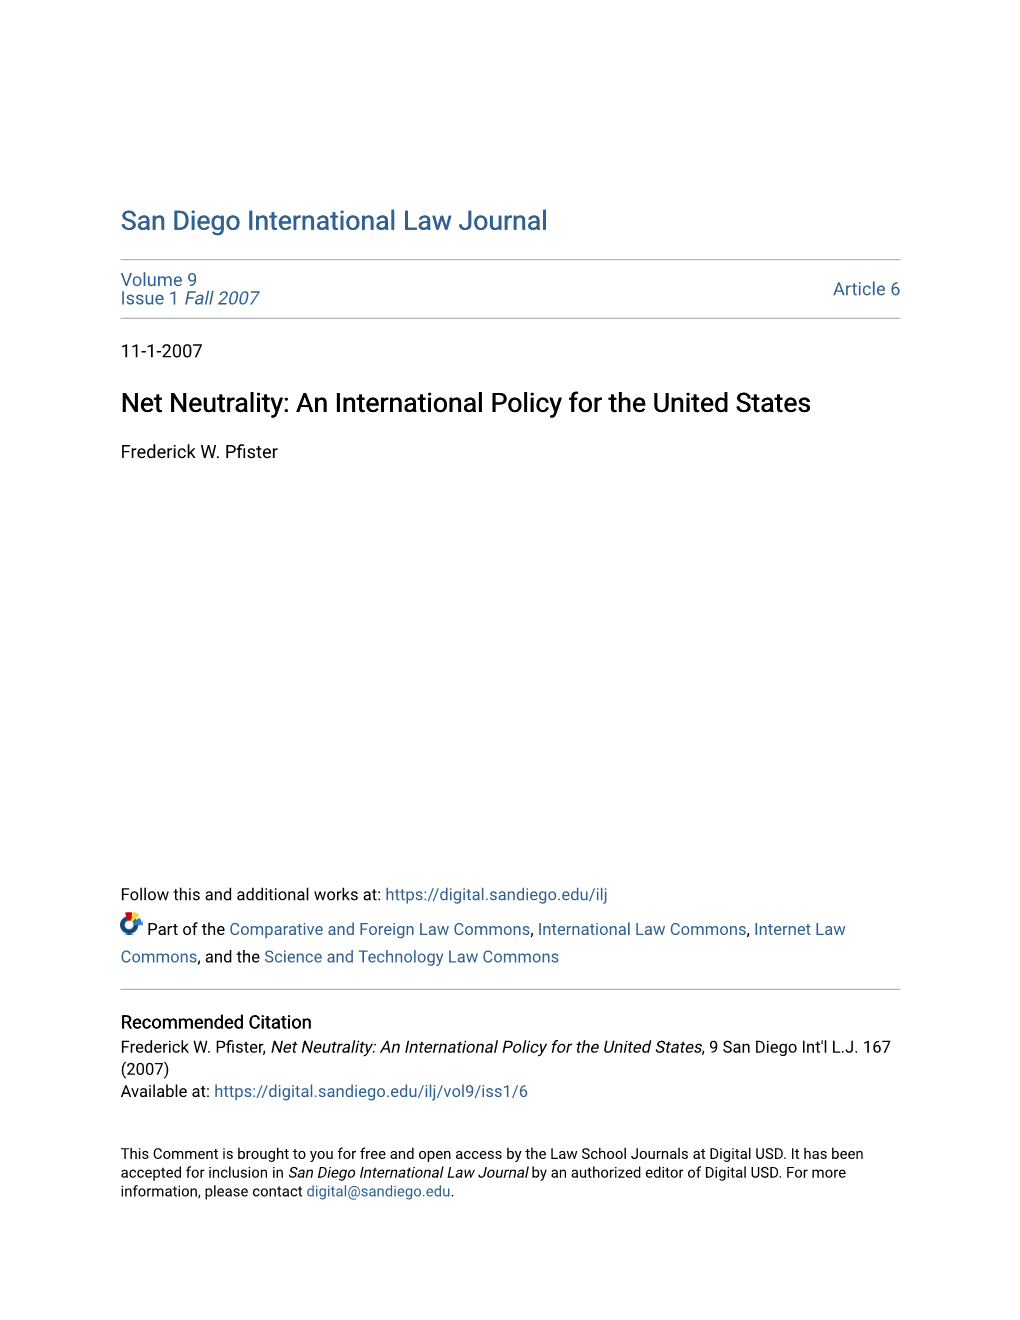 Net Neutrality: an International Policy for the United States